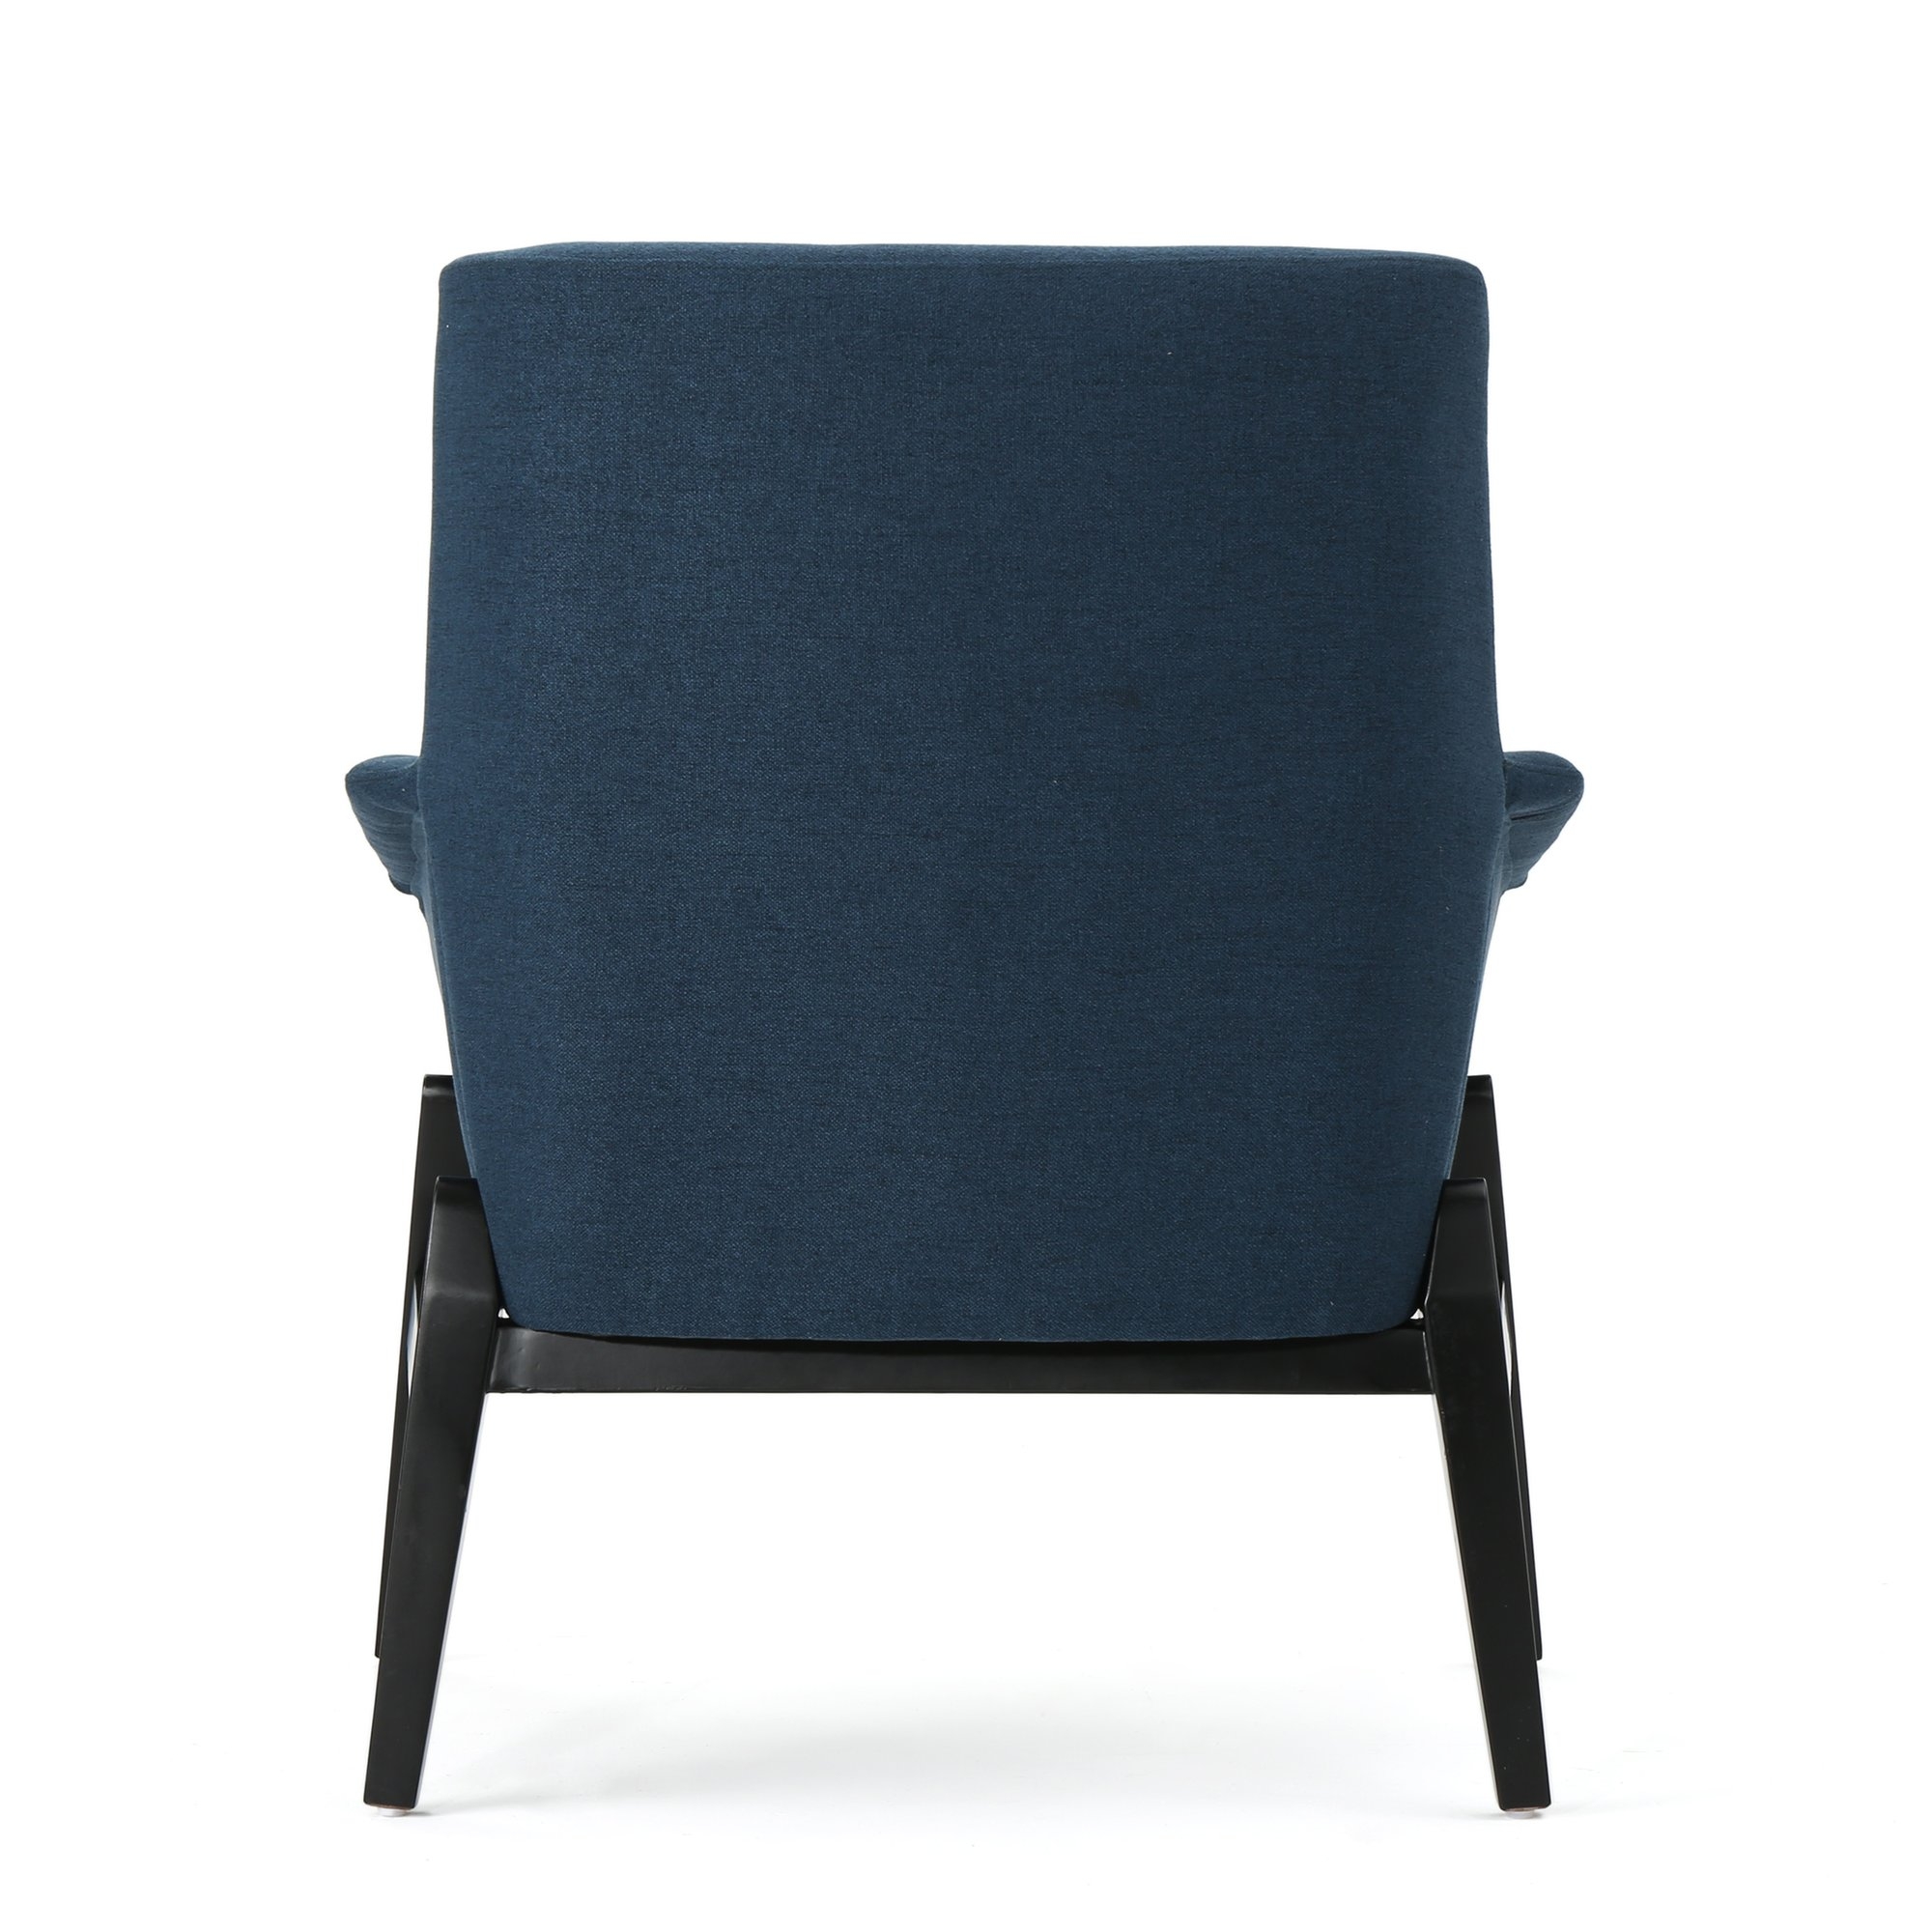 All Modern Fabric Armchair by Langley Street - Image 2